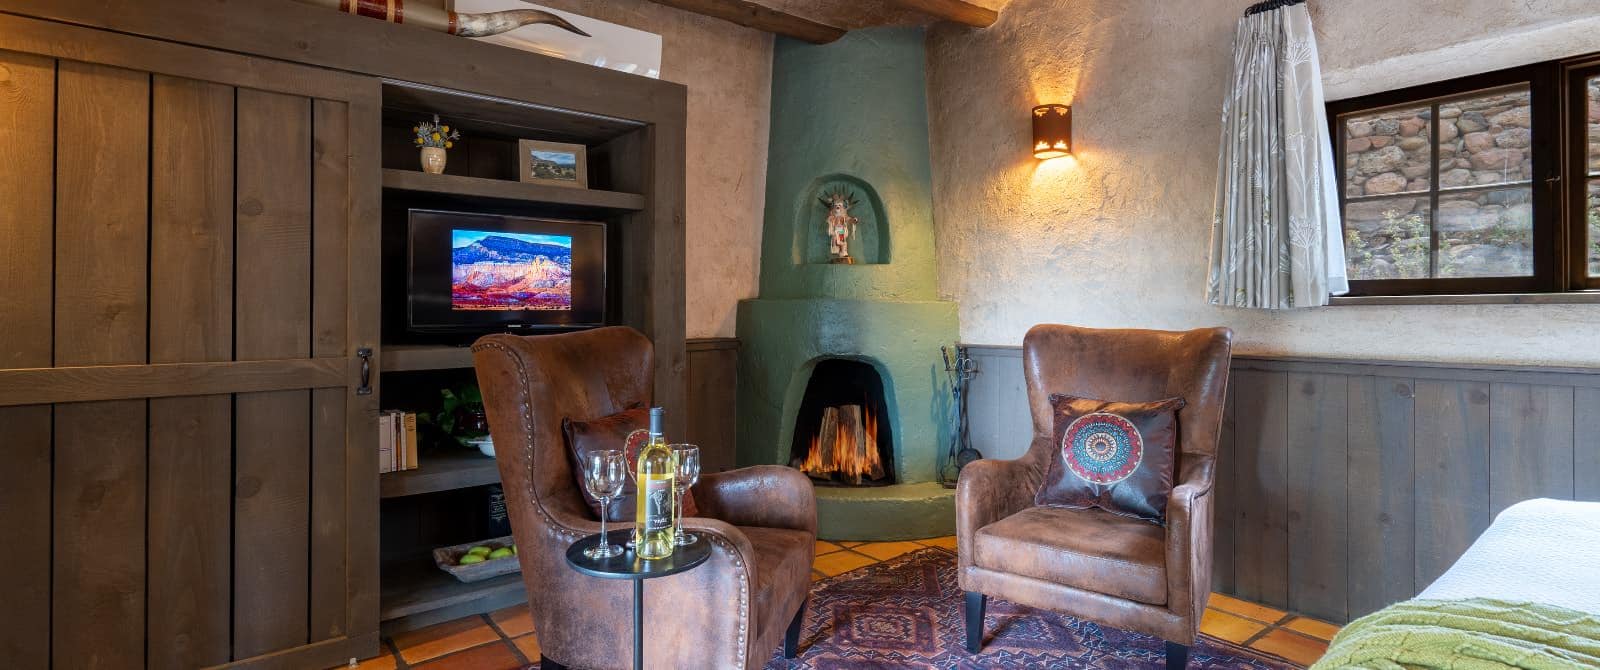 Green fireplace in Southwestern-style next to large wooden armoire, fronted by leather armchairs.